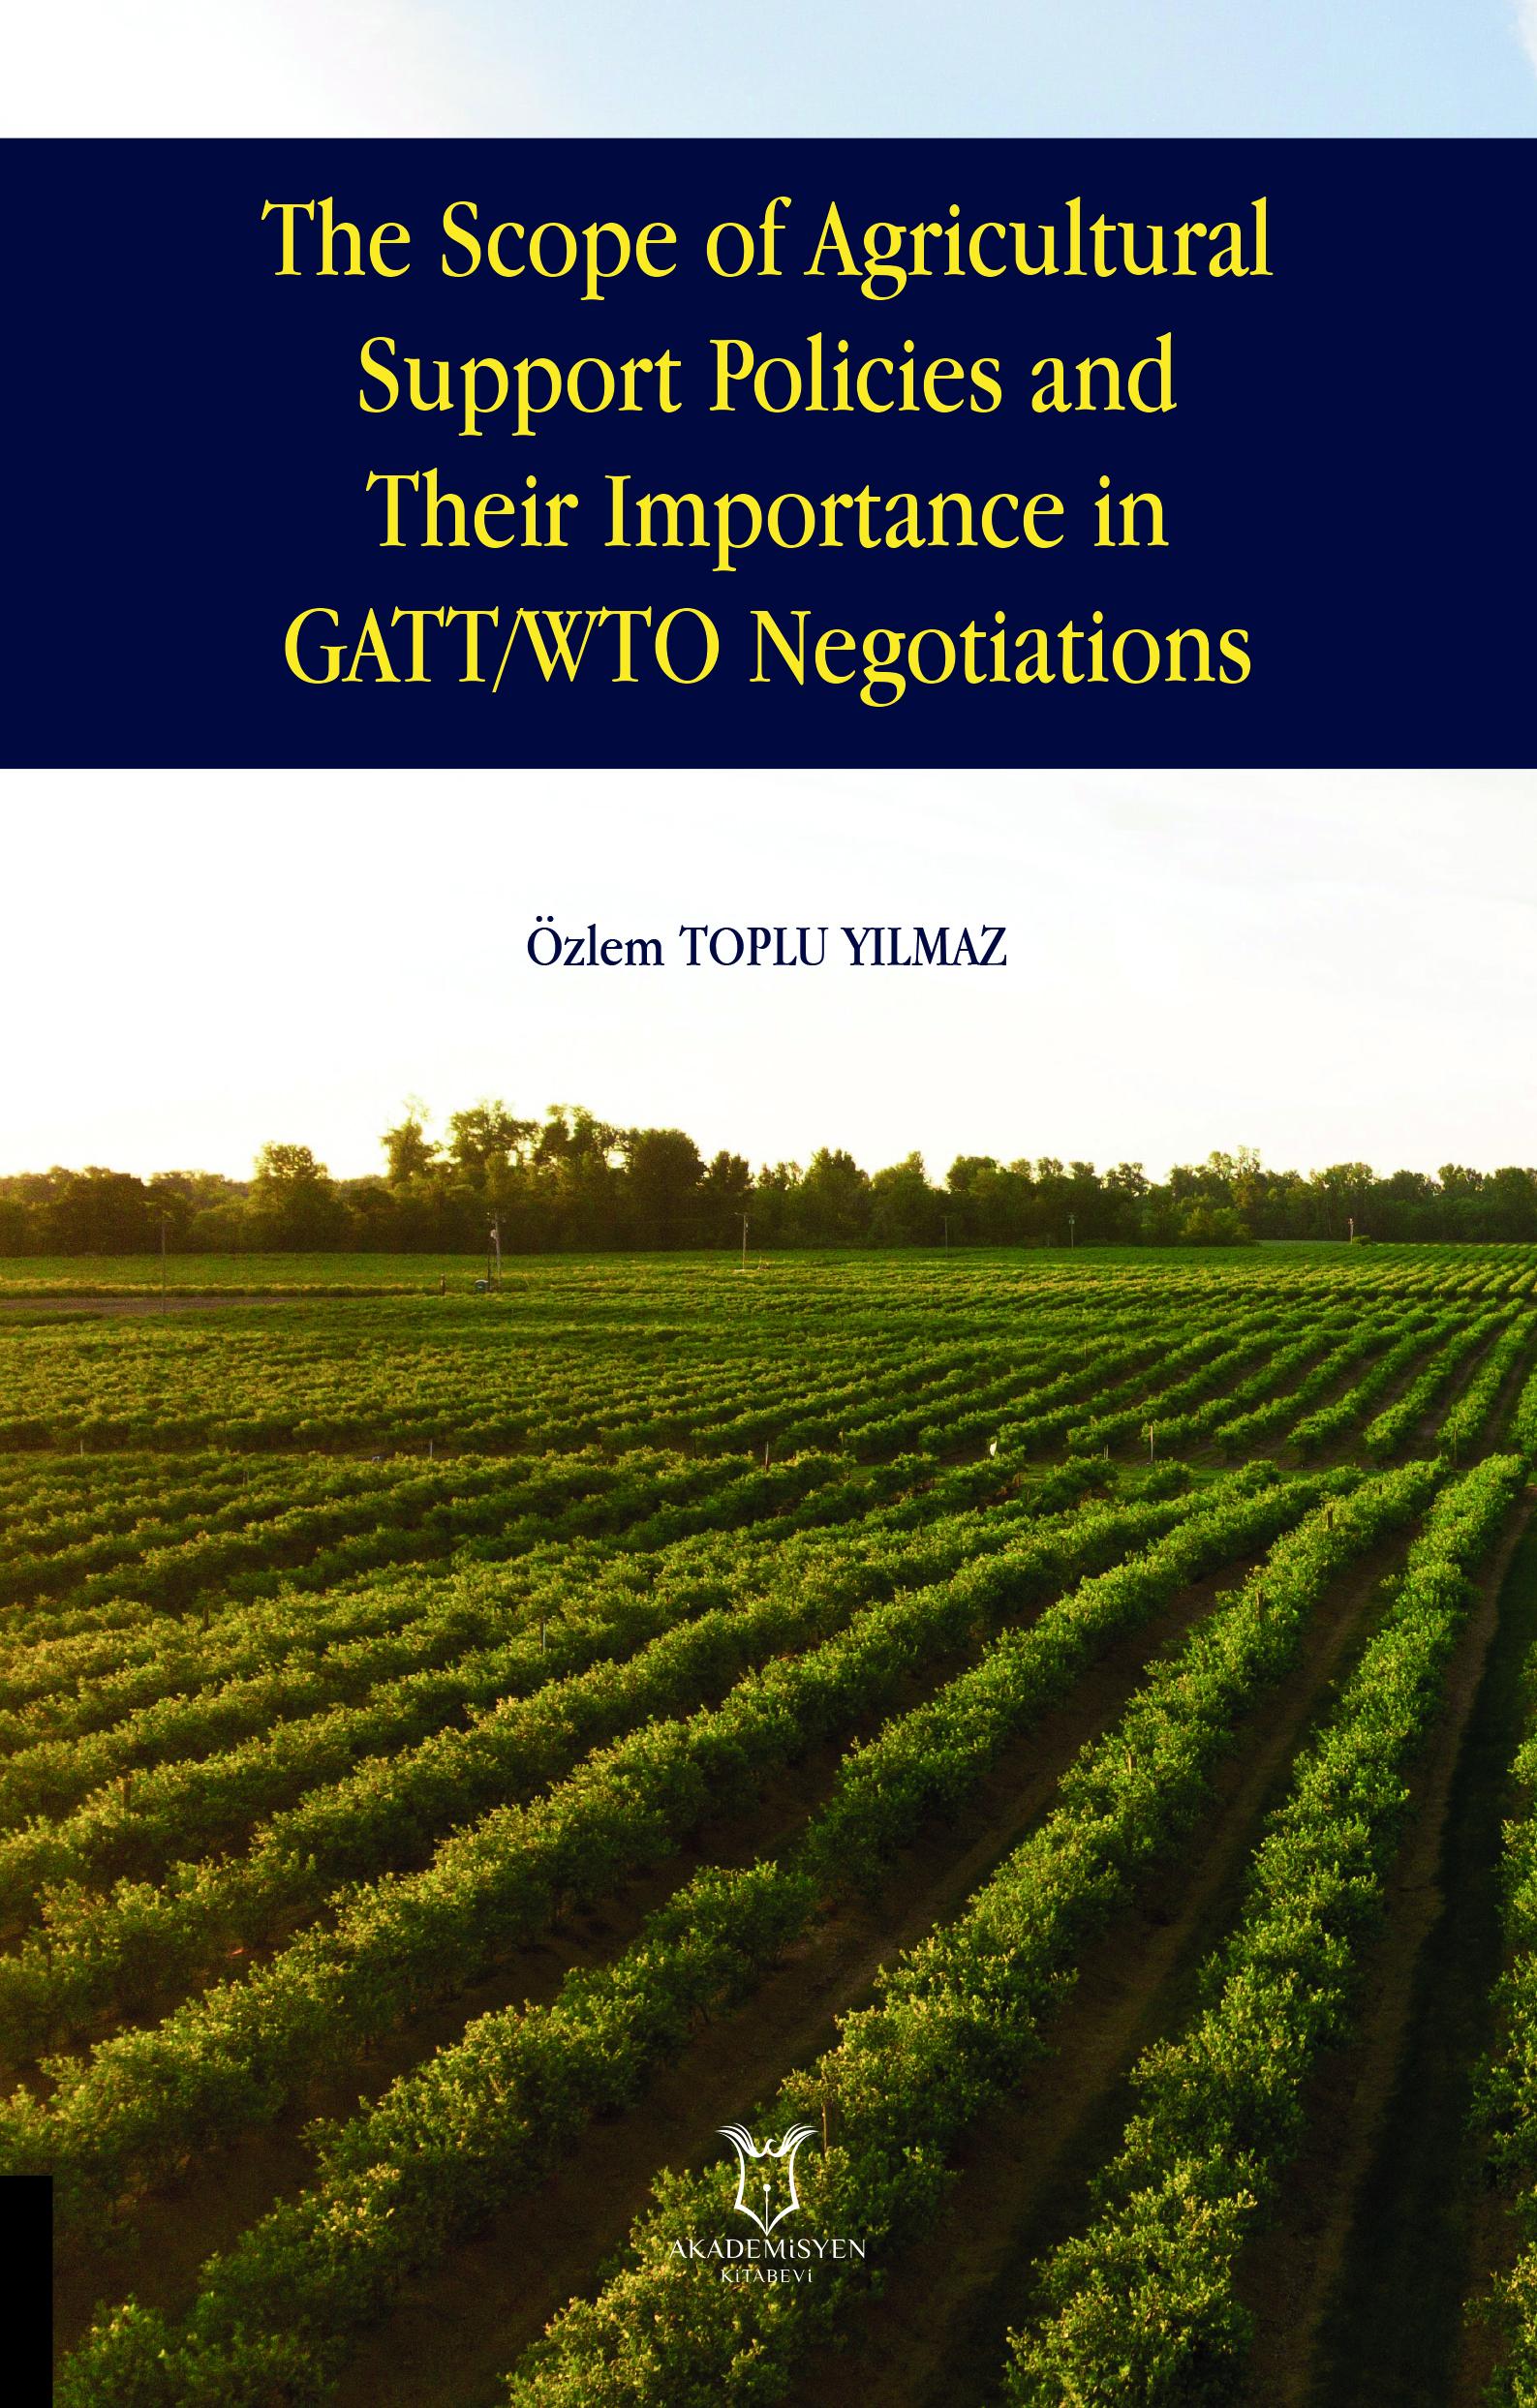 The Scope of Agricultural Support Policies and Their Importance in GATT/ WTO Negotiations